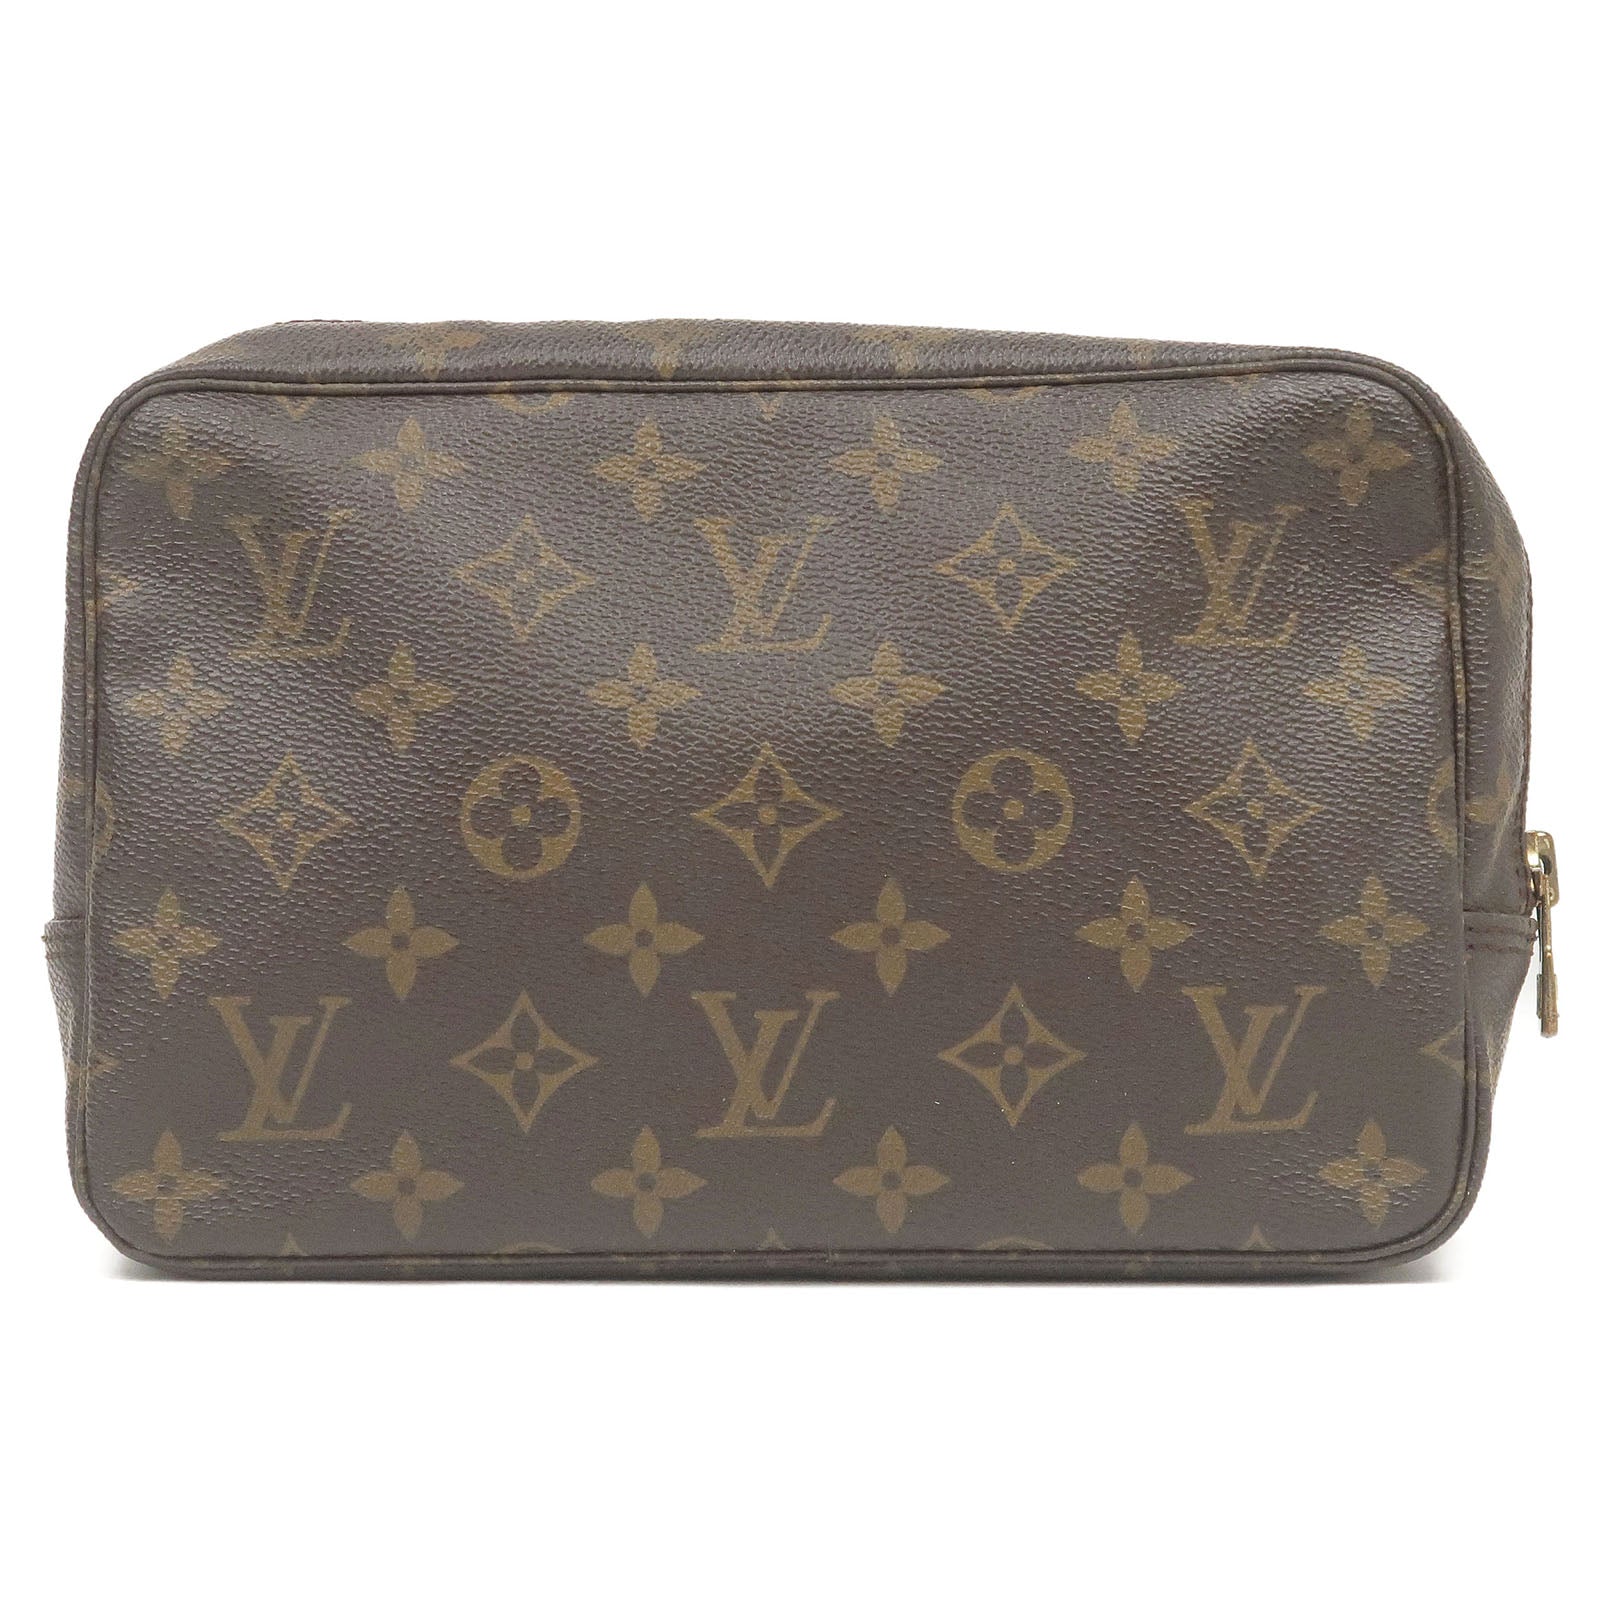 Louis Vuitton Summer Trunks For Monogram Canvas and Damier Azur - Spotted  Fashion